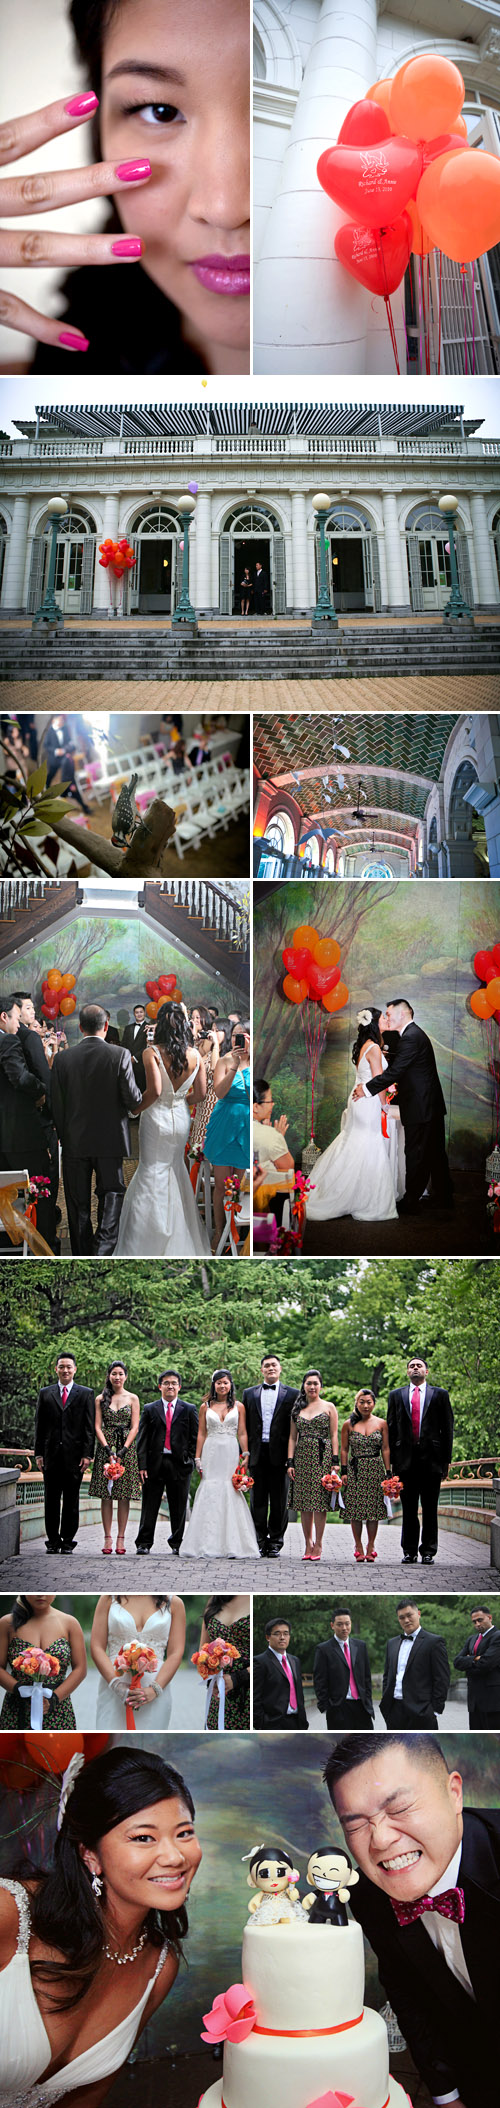 Fun and colorful Brooklyn New York real wedding - Prospect Park Audubon Center - photos by Tammy Swales Photography